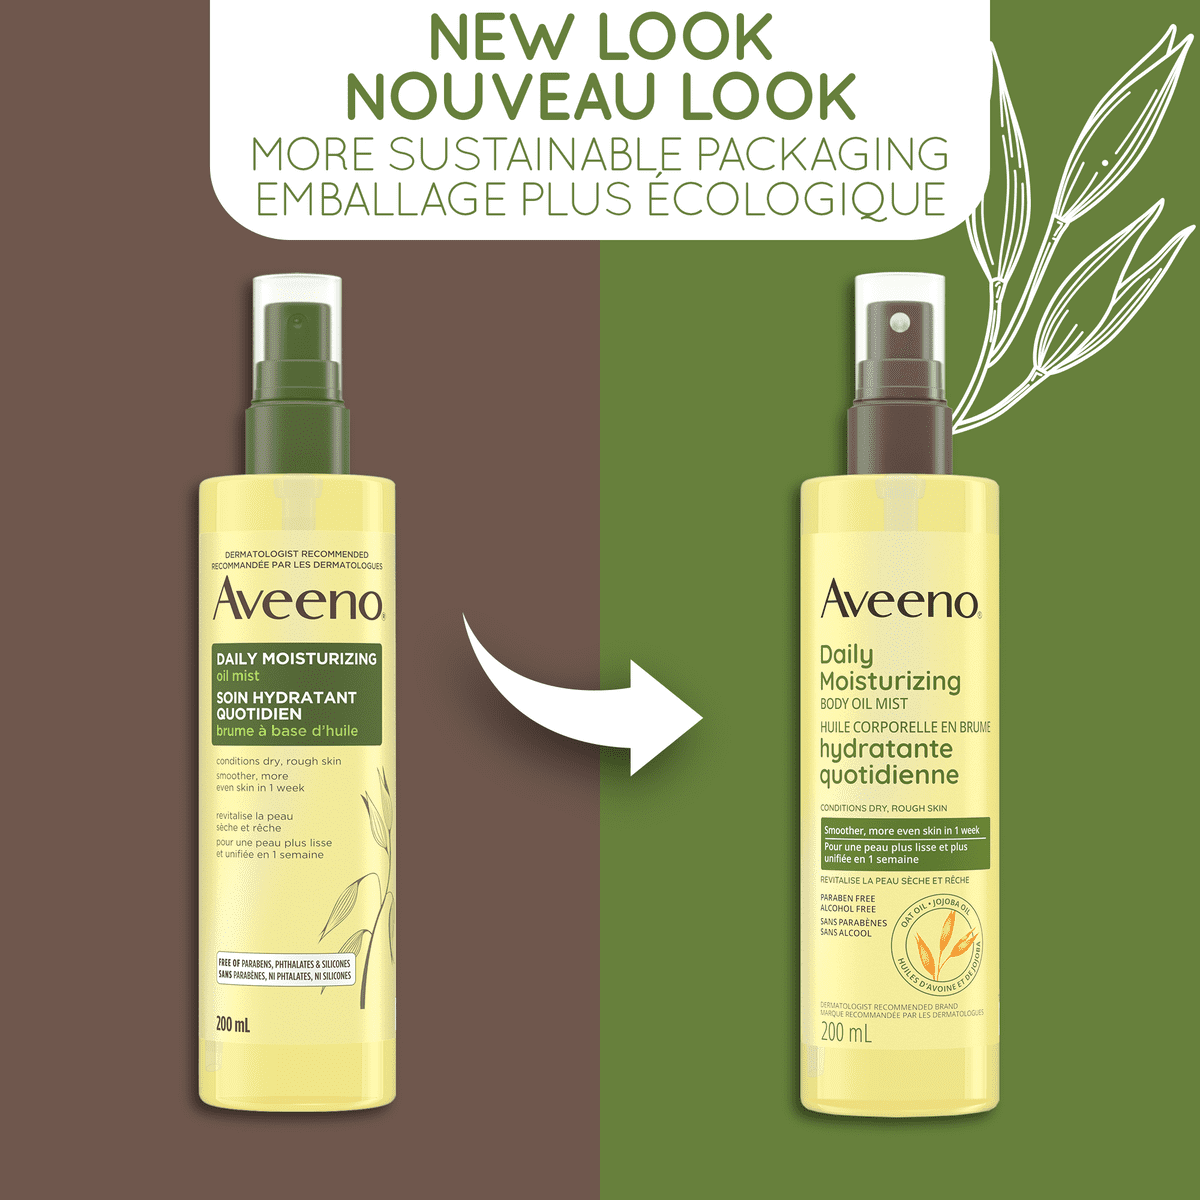 Old and new packaging of AVEENO® Daily Moisturizing Oil Mist, spray bottle, 200 mL, with text 'new look'